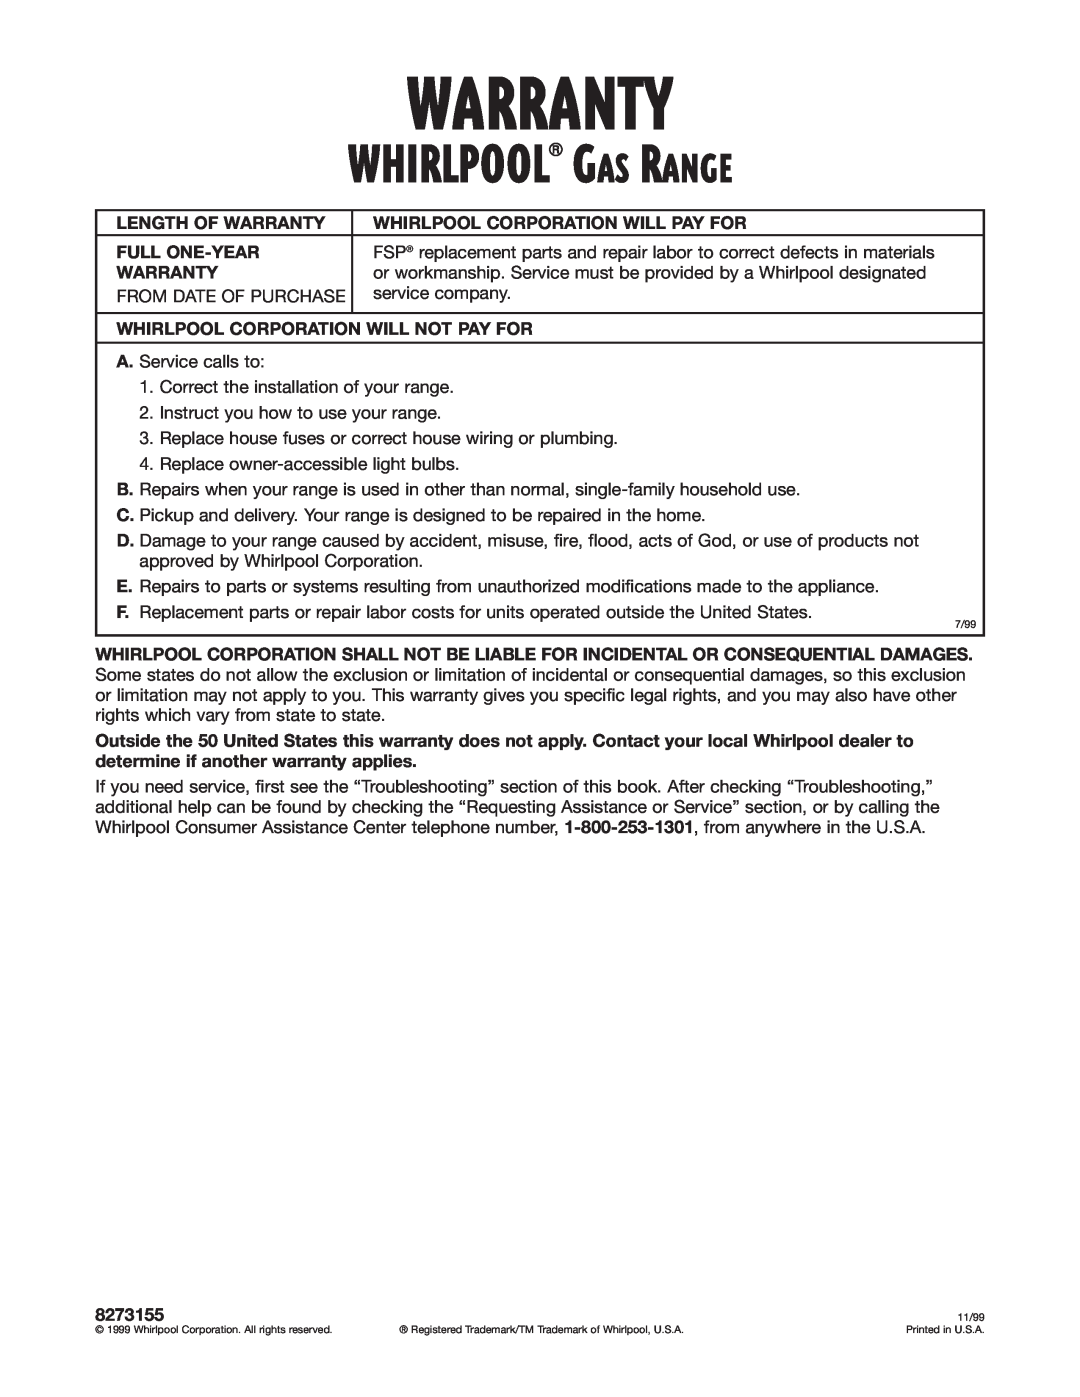 Whirlpool GS395LEH Whirlpool Gas Range, Length Of Warranty, Whirlpool Corporation Will Pay For, Full One-Year, 8273155 